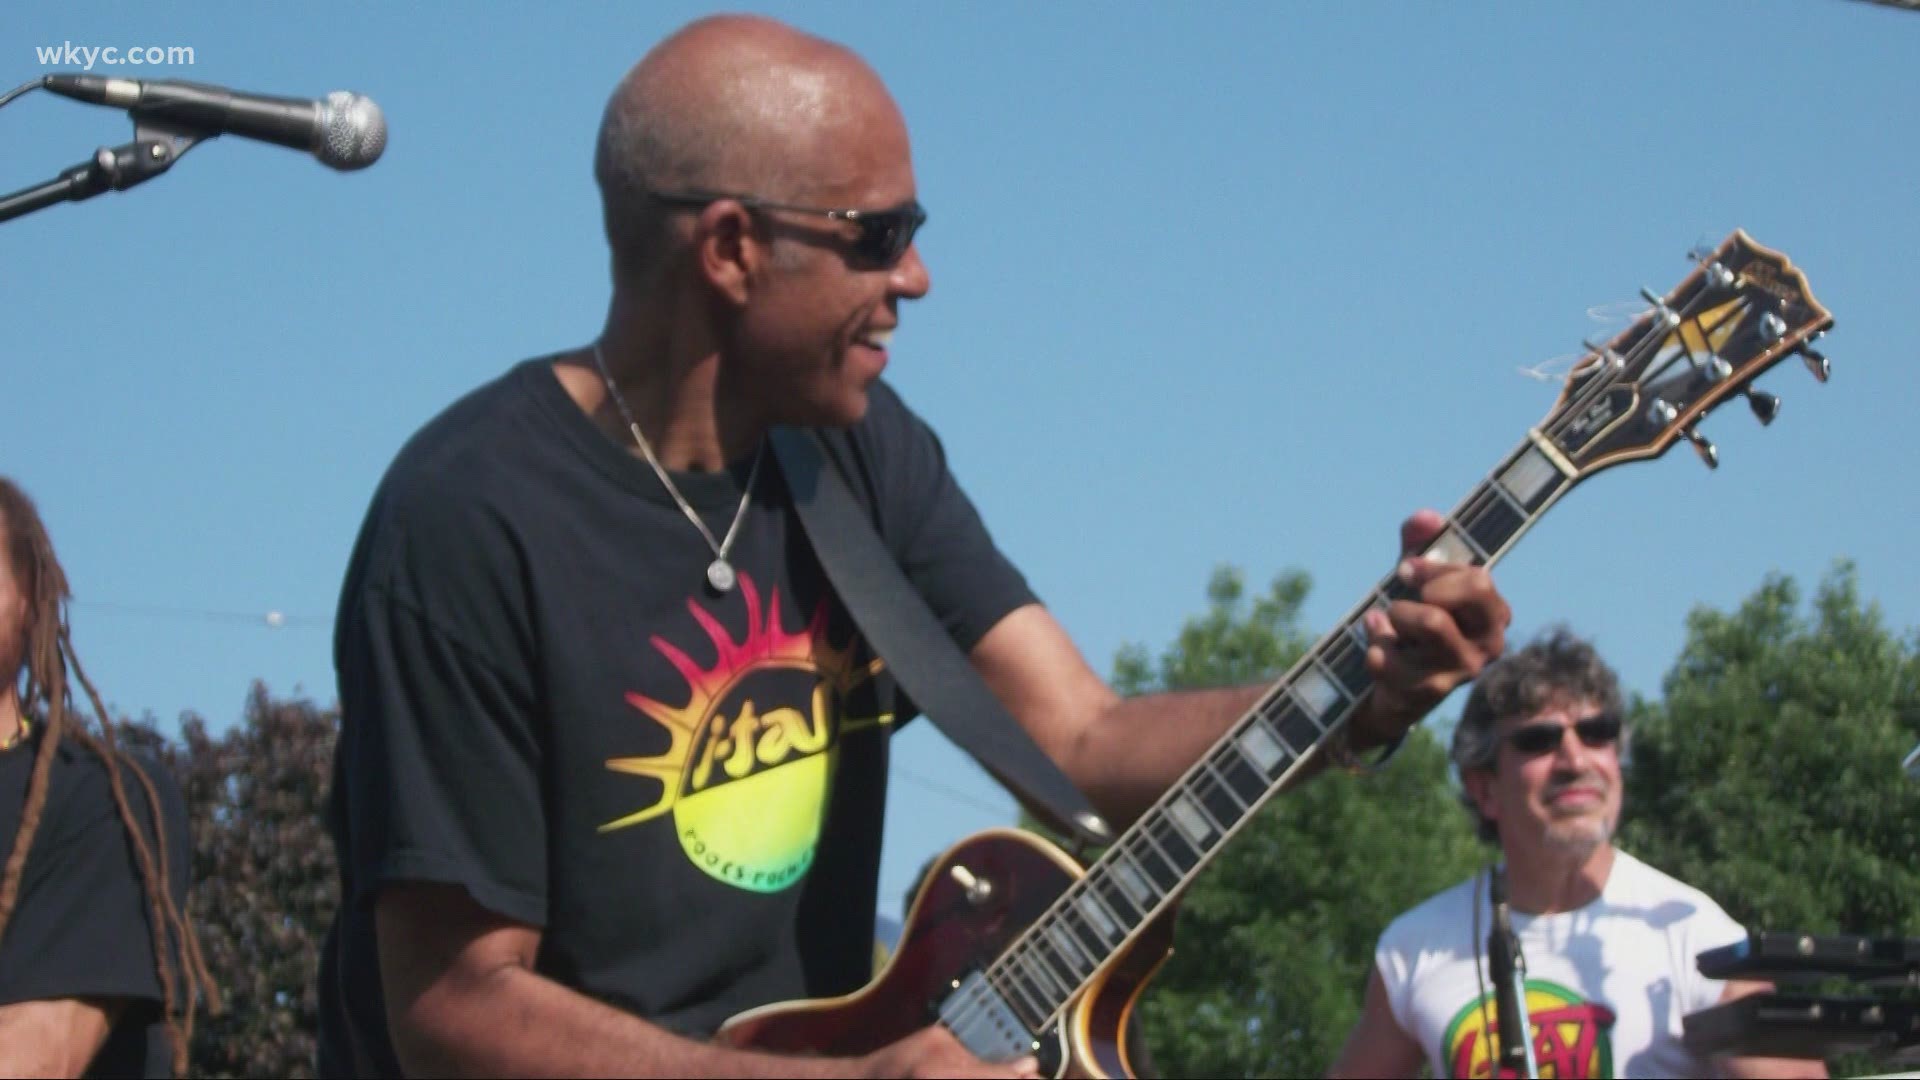 David Smeltz, founder and guitarist of pioneering reggae group I-tal passed away one month ago after a long battle with coronavirus.